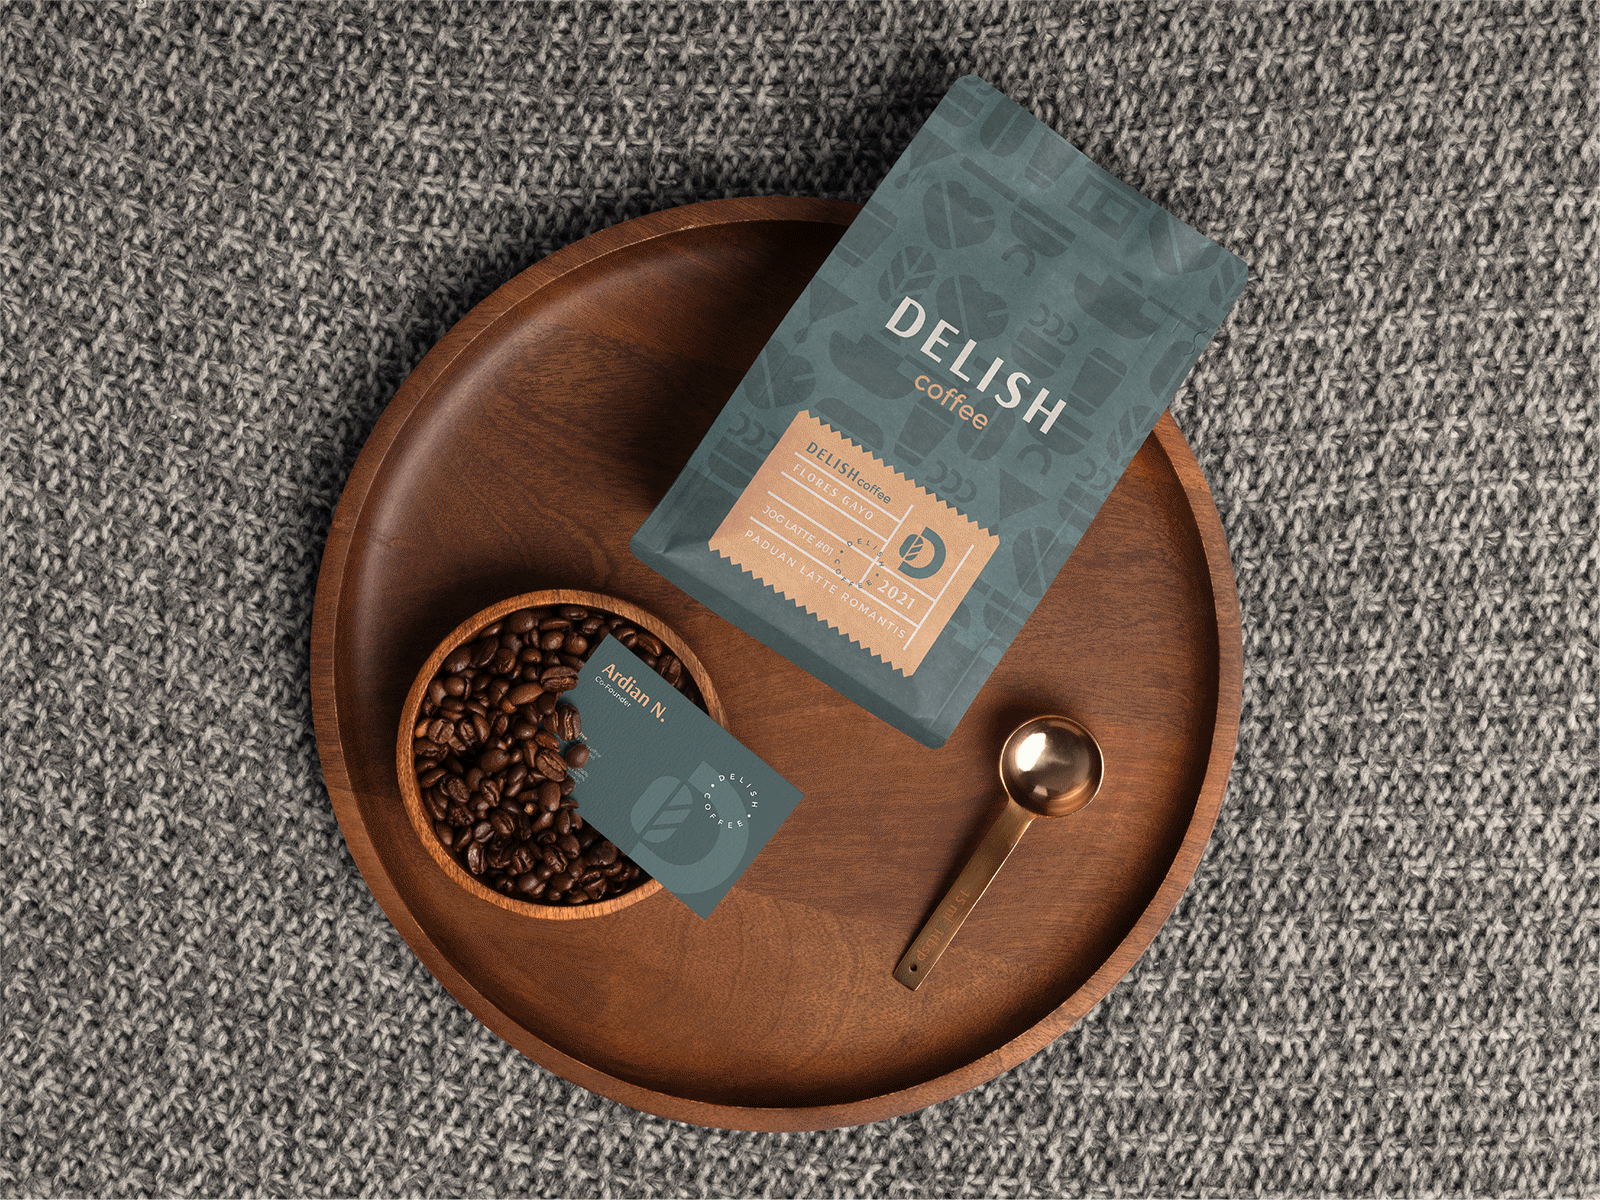 Delish Coffee Packaging and Brand Design brand brand agency brand and identity brand guideline brand identity branding cafe logo coffee coffee cup design coffee cup packaging design coffee shop cup design d logo design icon icon set label design logo mark nature packaging design